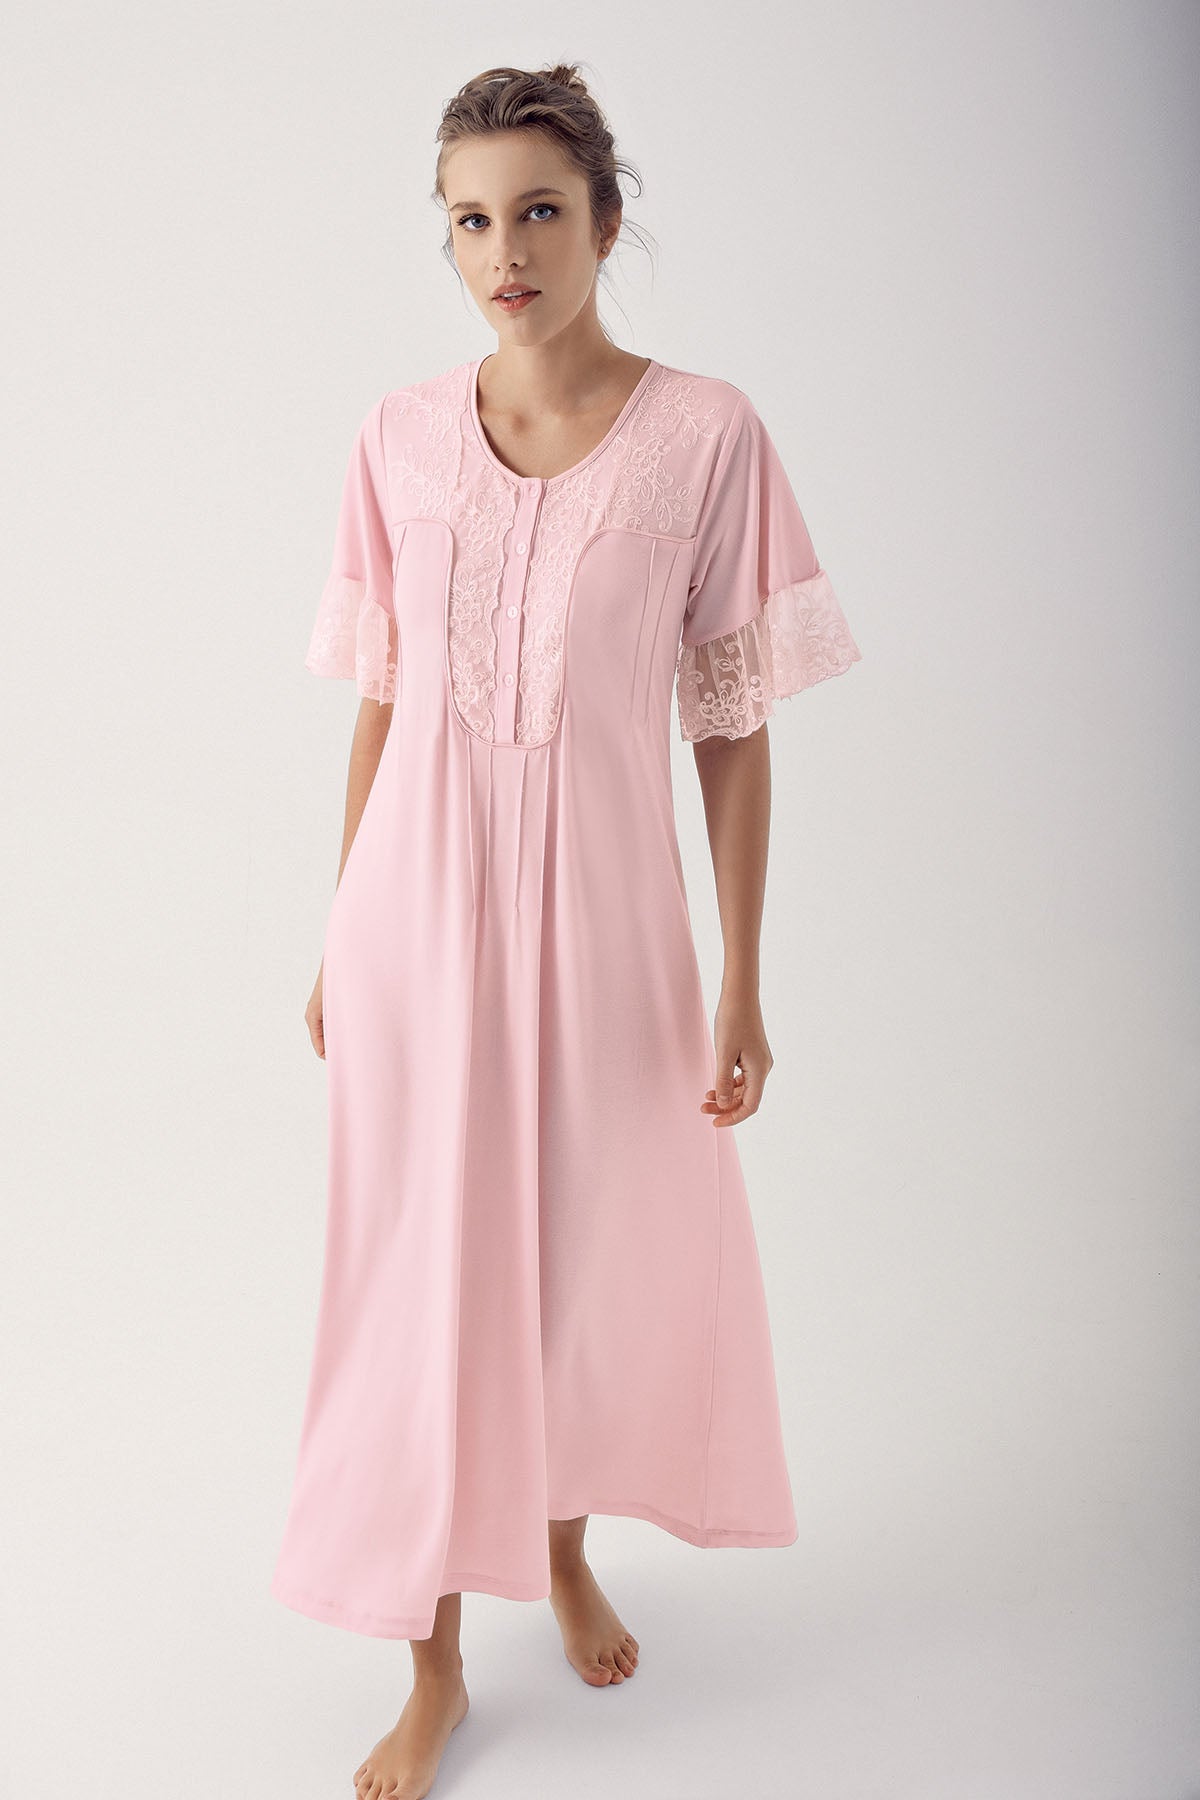 Shopymommy 55103 Elegance Lace Sleeves Maternity & Nursing Nightgown P